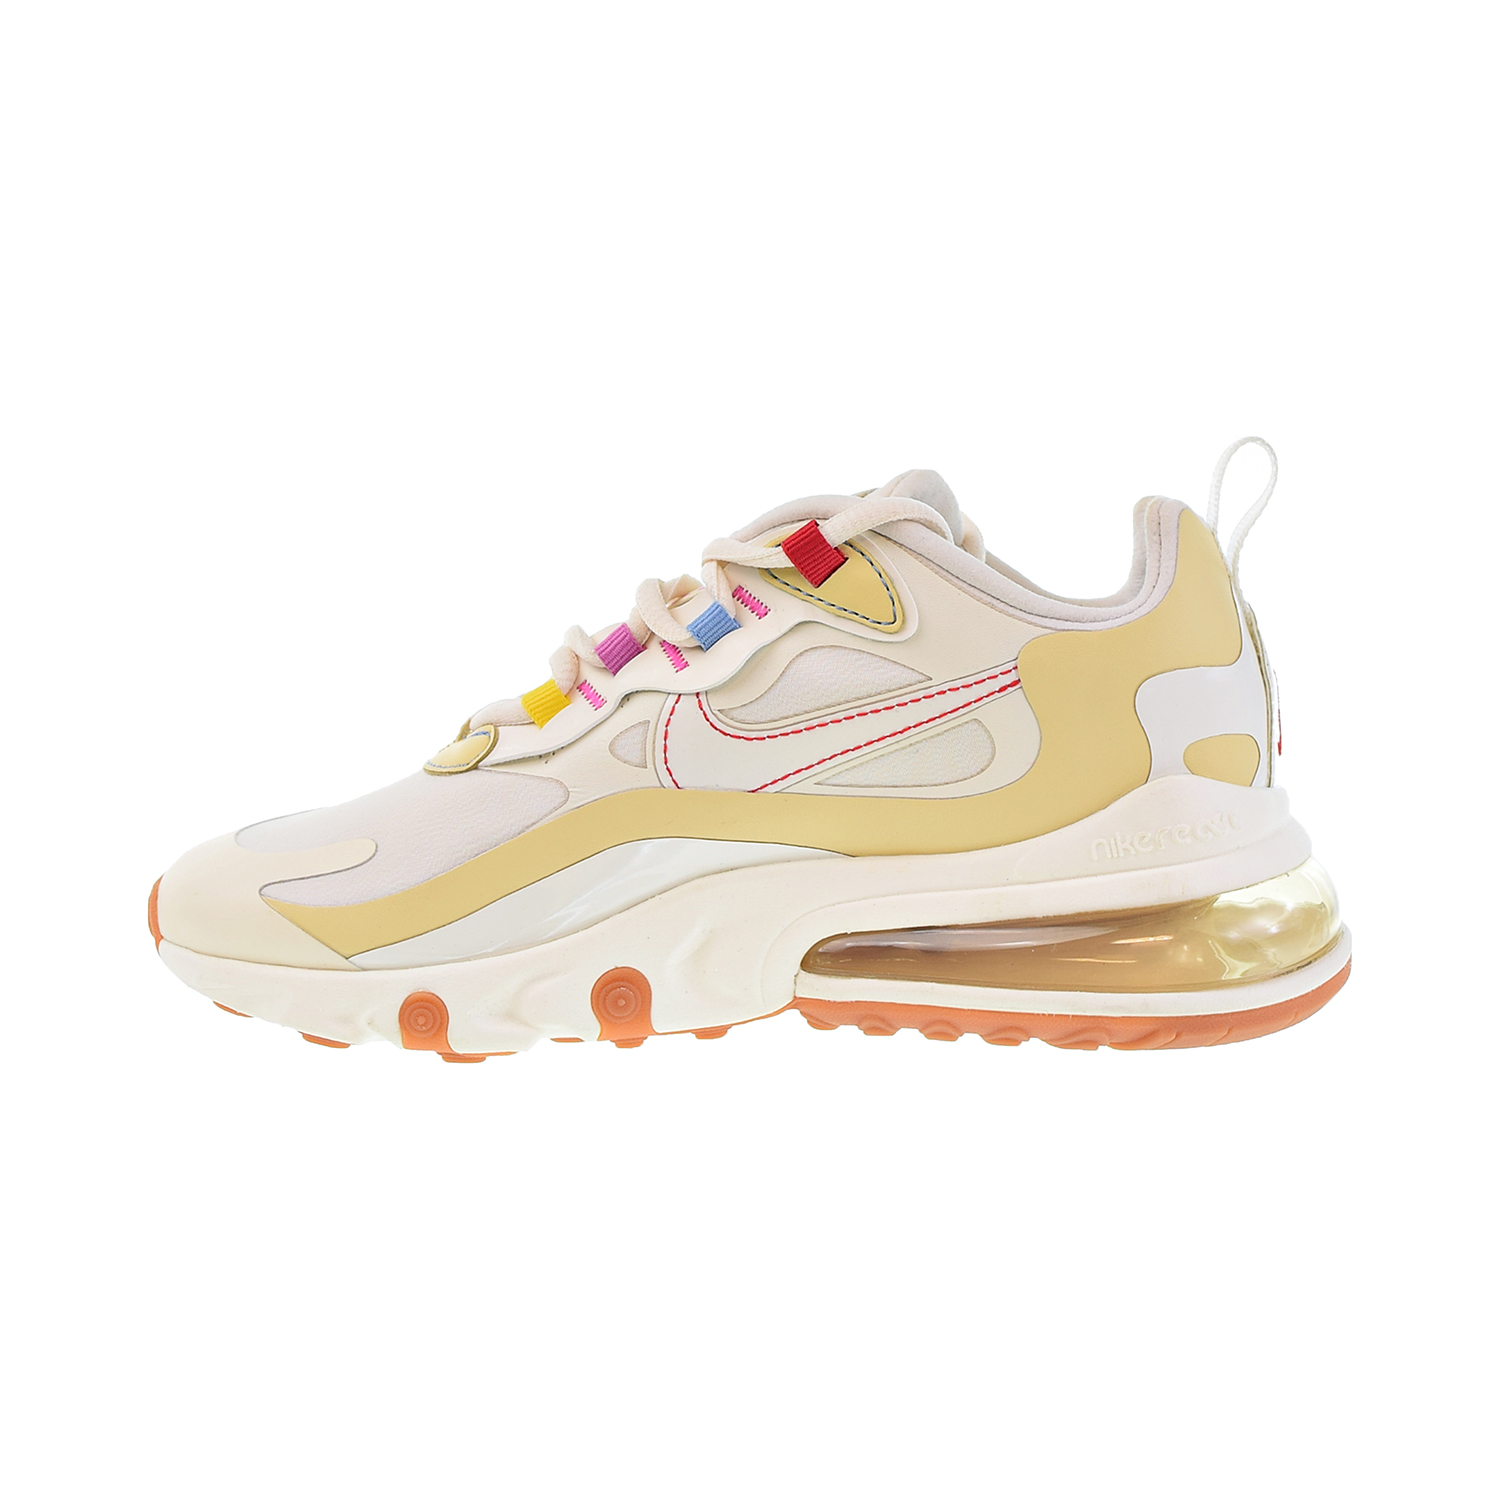 Nike Air Max 270 React Women's Shoes Pale Ivory-Sail-Pale Vanilla cq0208-101 - image 4 of 6